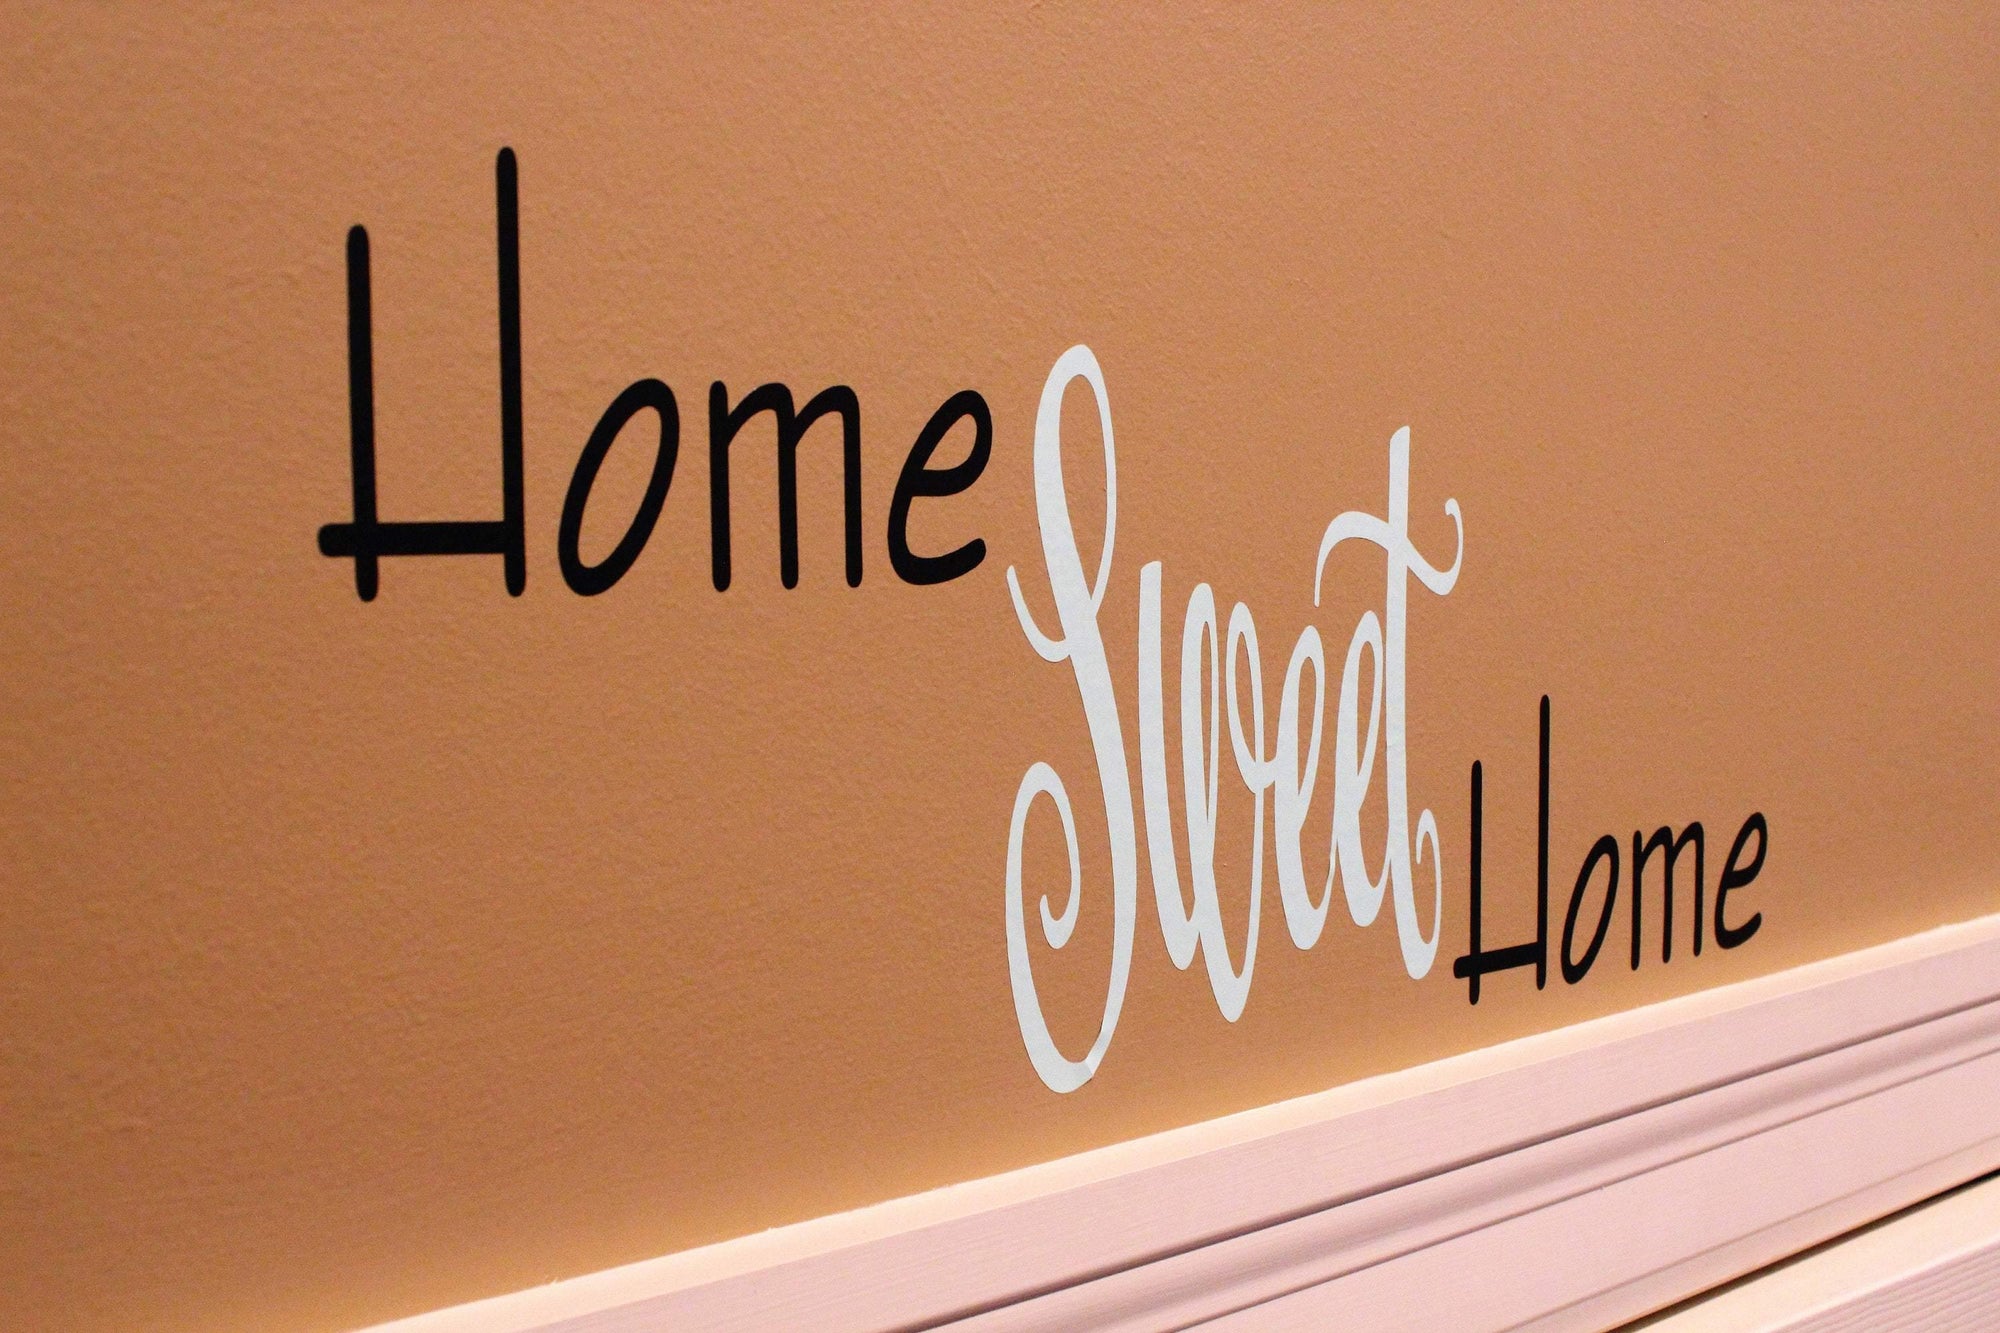 Door Decal | Personalized Vinyl Decal | Monogram Vinyl Decal | Home Sweet Home - This & That Solutions - Door Decal | Personalized Vinyl Decal | Monogram Vinyl Decal | Home Sweet Home - Personalized Gifts & Custom Home Decor